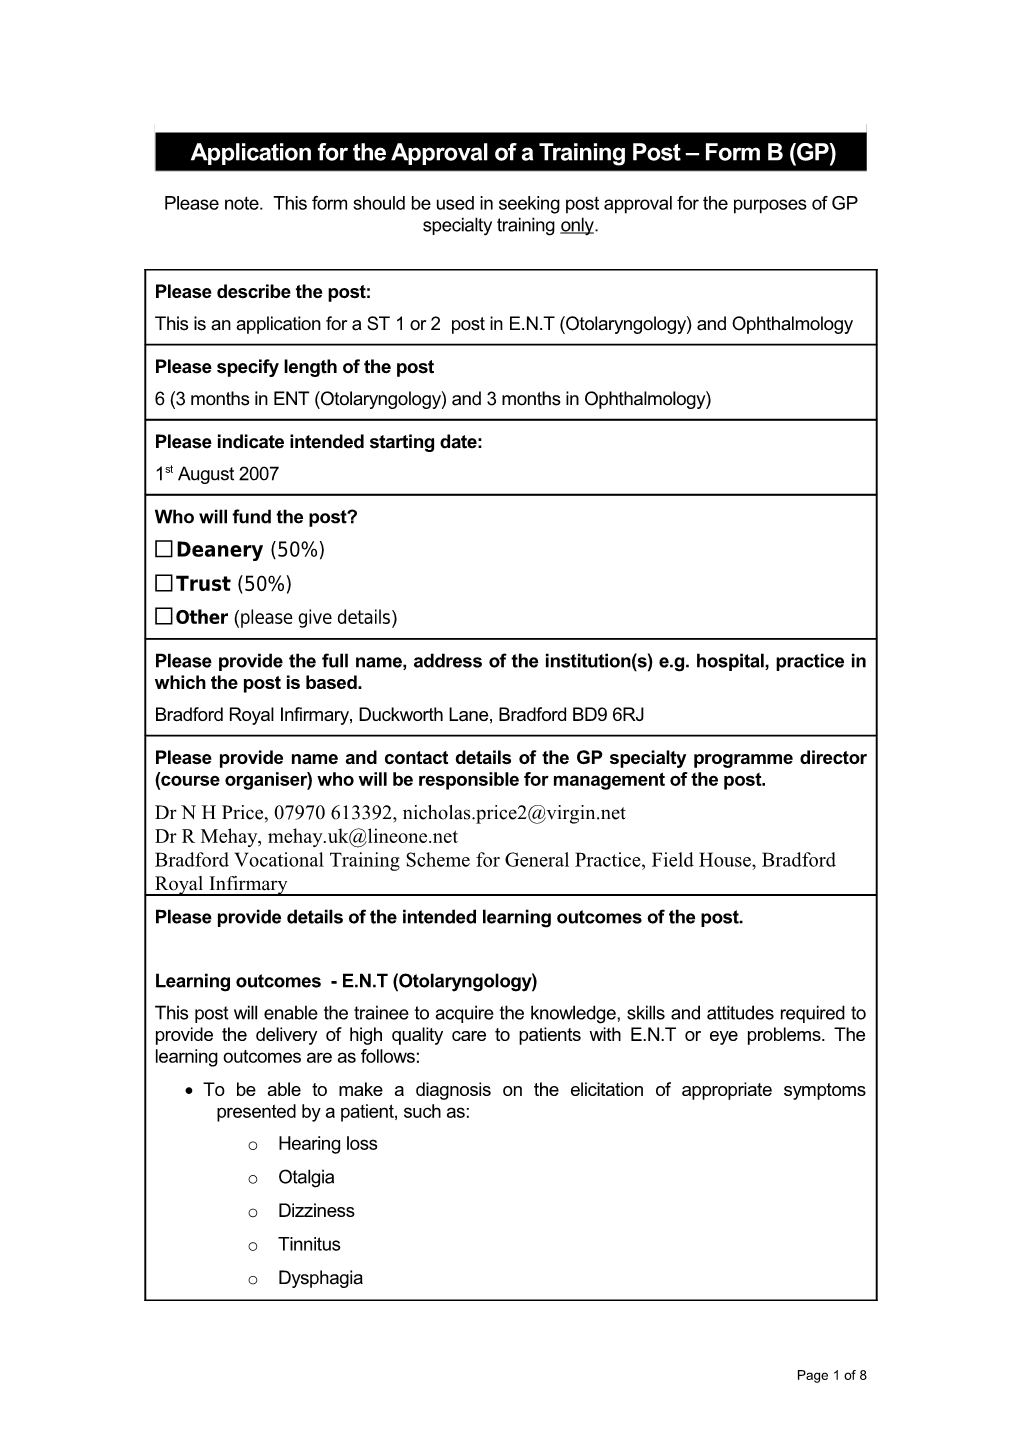 Freedom of Information - Processes & Procedures - Gp Department Word Final Template In